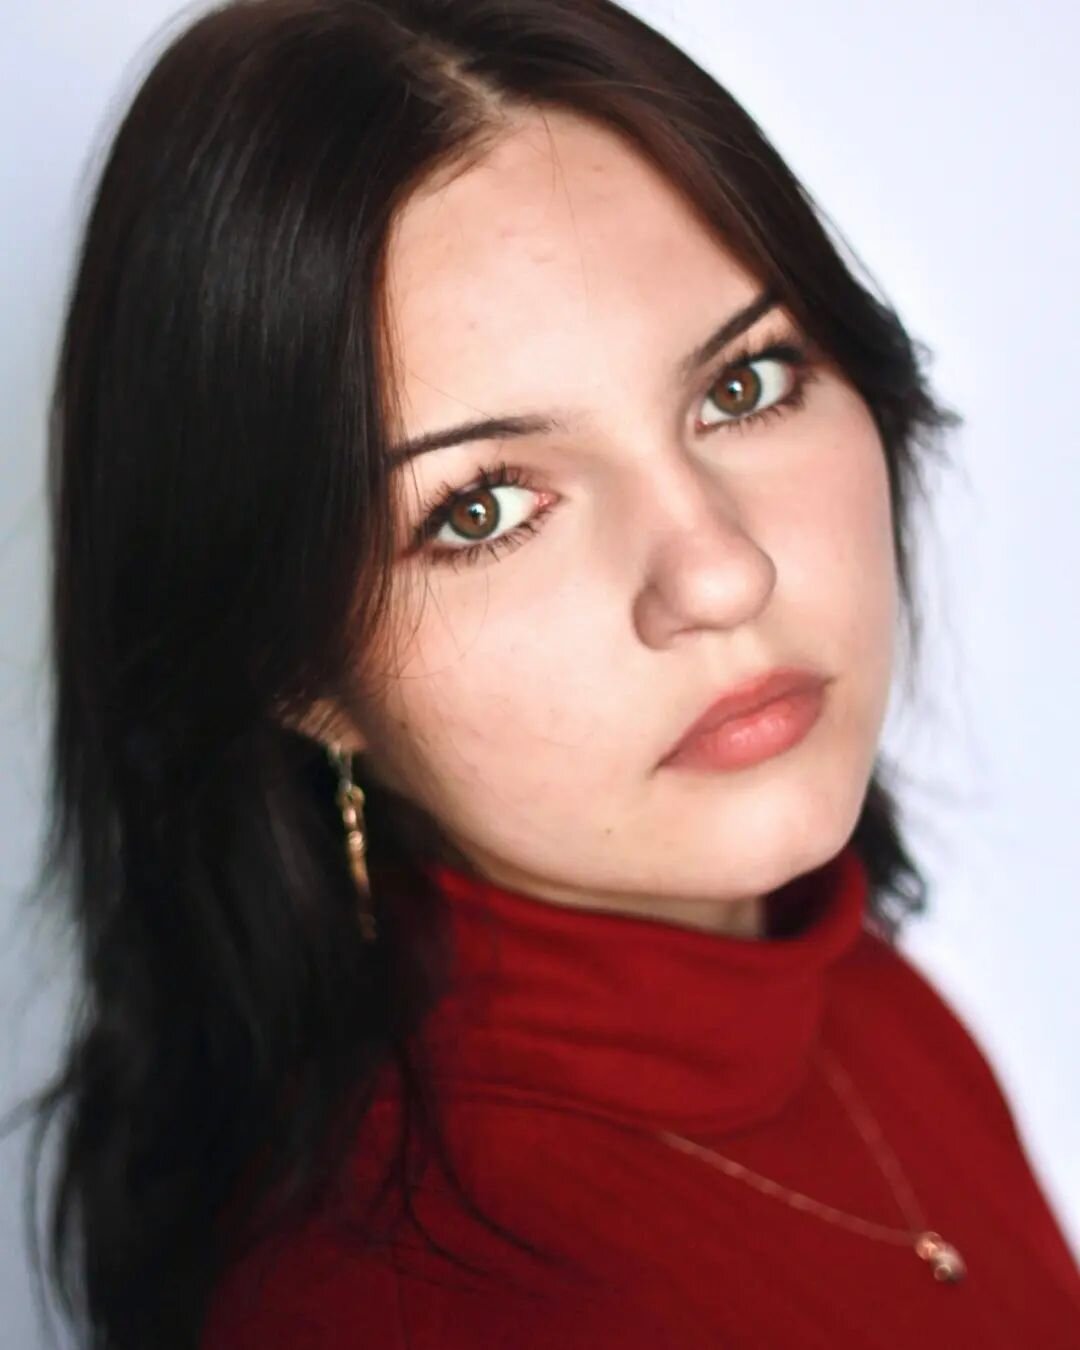 Name: Aava Merikanto
Playing age: 15-22

Aava is an 18-year old actress from Helsinki, Finland. Aava started acting at 8-years old, starring in the finnish trilogies &rdquo;Jill and Joy&rdquo; (2013-2017). Some of her recent performances include role